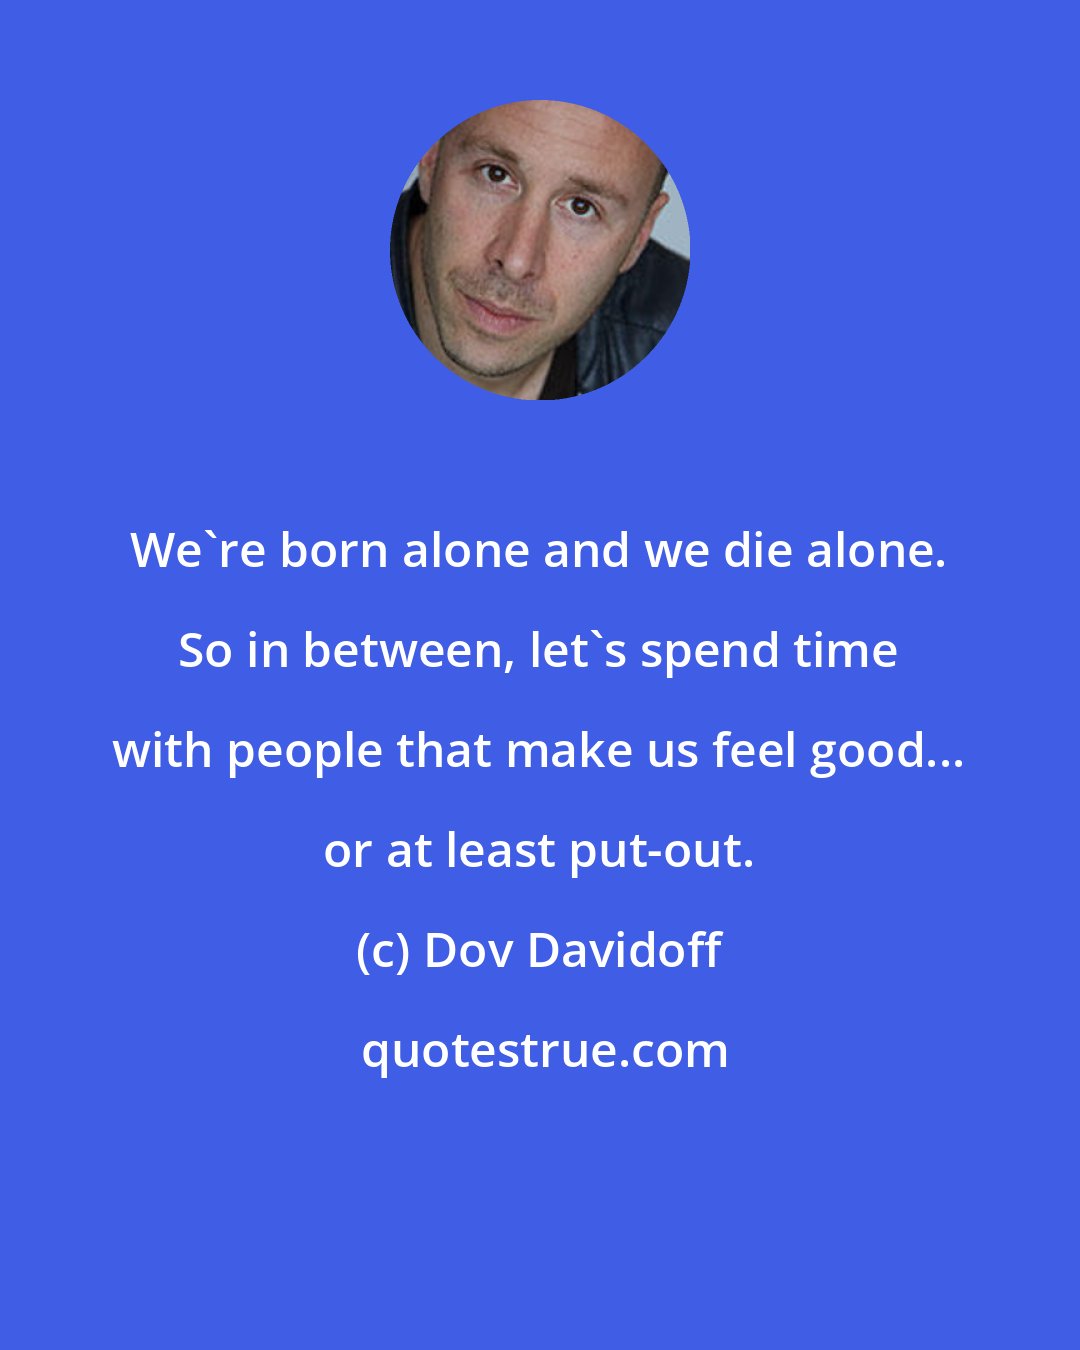 Dov Davidoff: We're born alone and we die alone. So in between, let's spend time with people that make us feel good... or at least put-out.